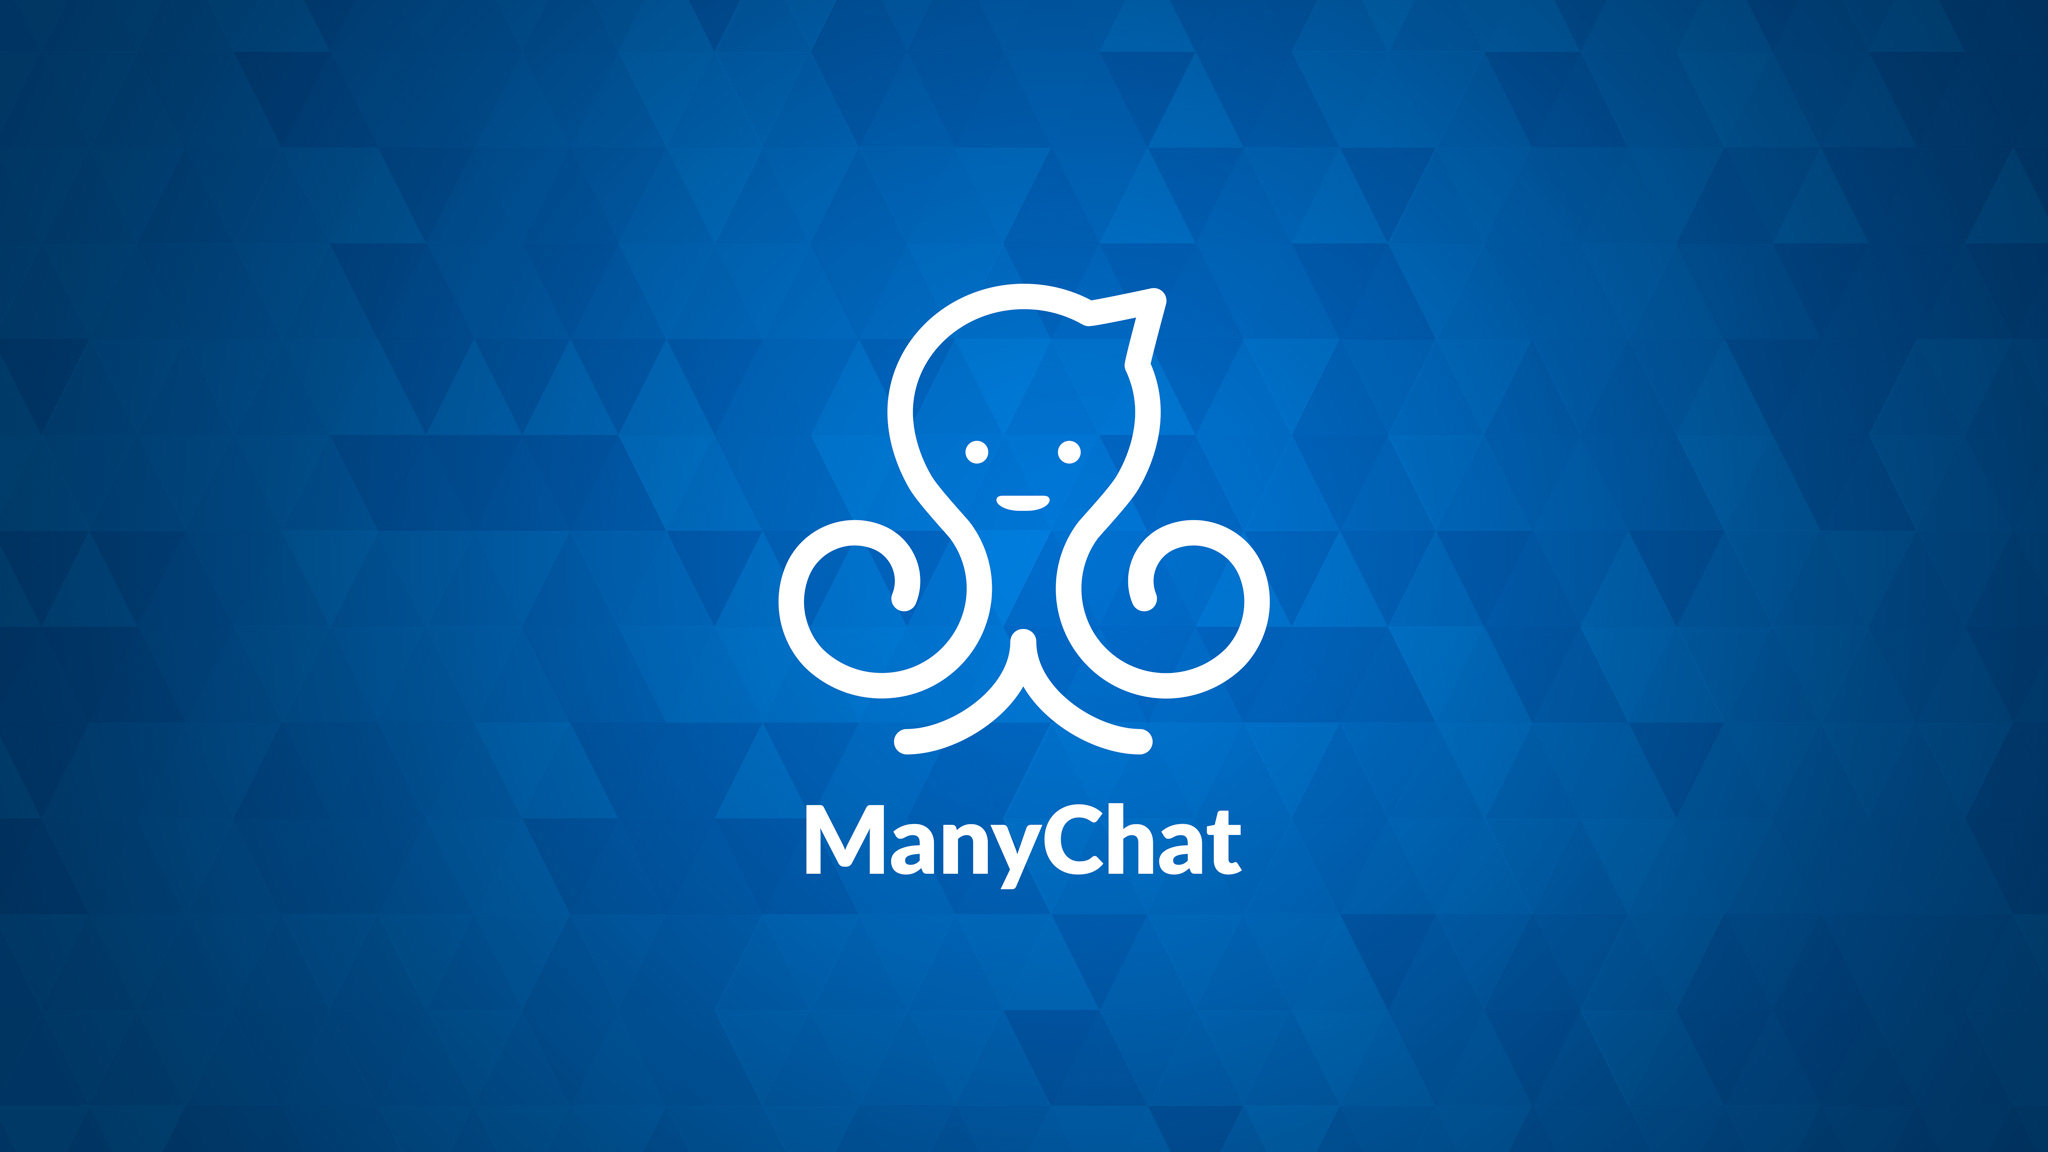 ManyChat Hero Background uploaded once again. Who did this?